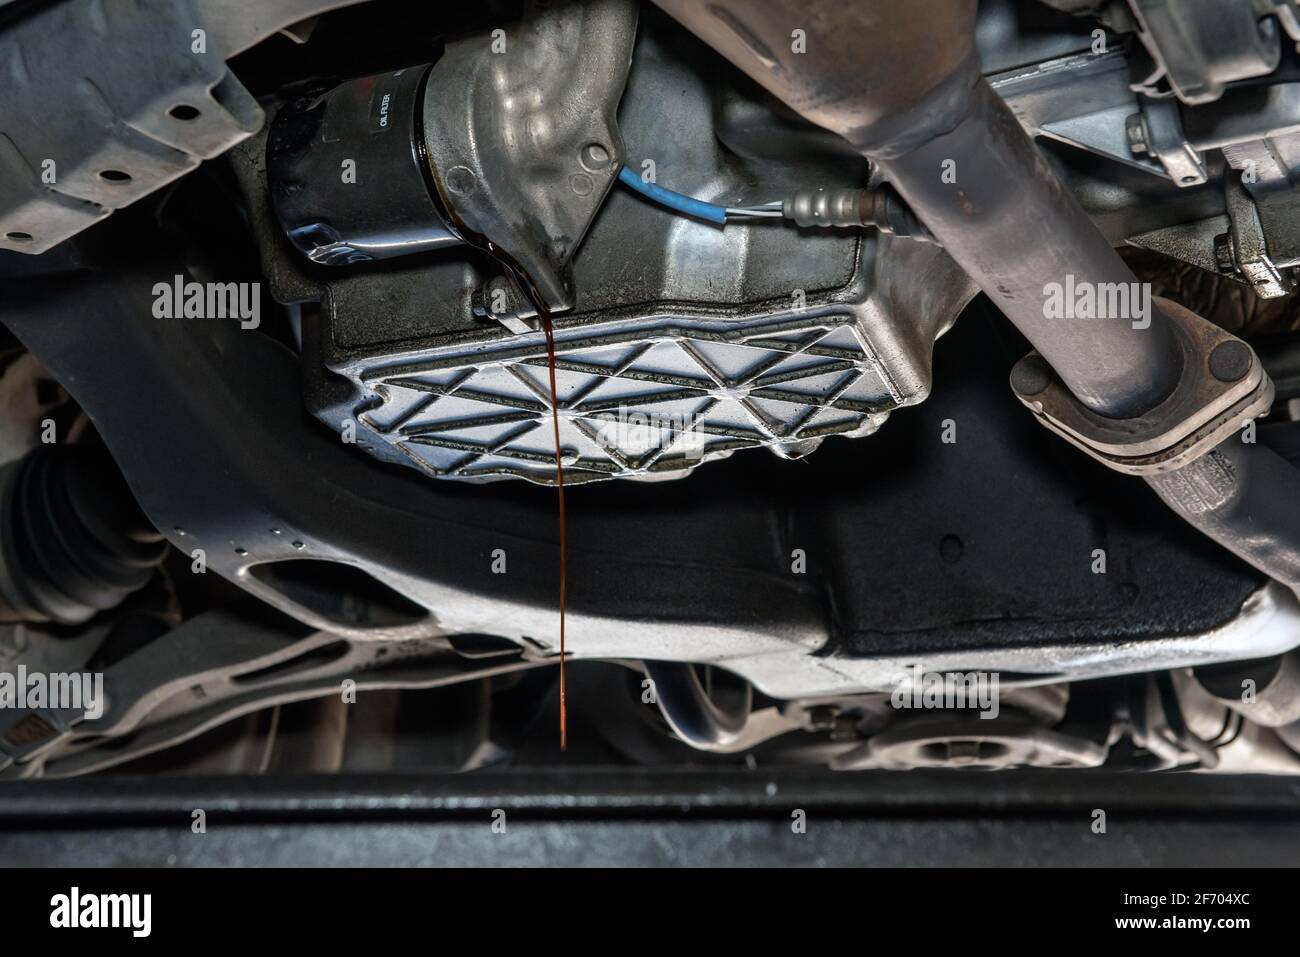 Oil drains from from beneath vehicle during a routine maintenance fluid change at mechanic garage. Stock Photo